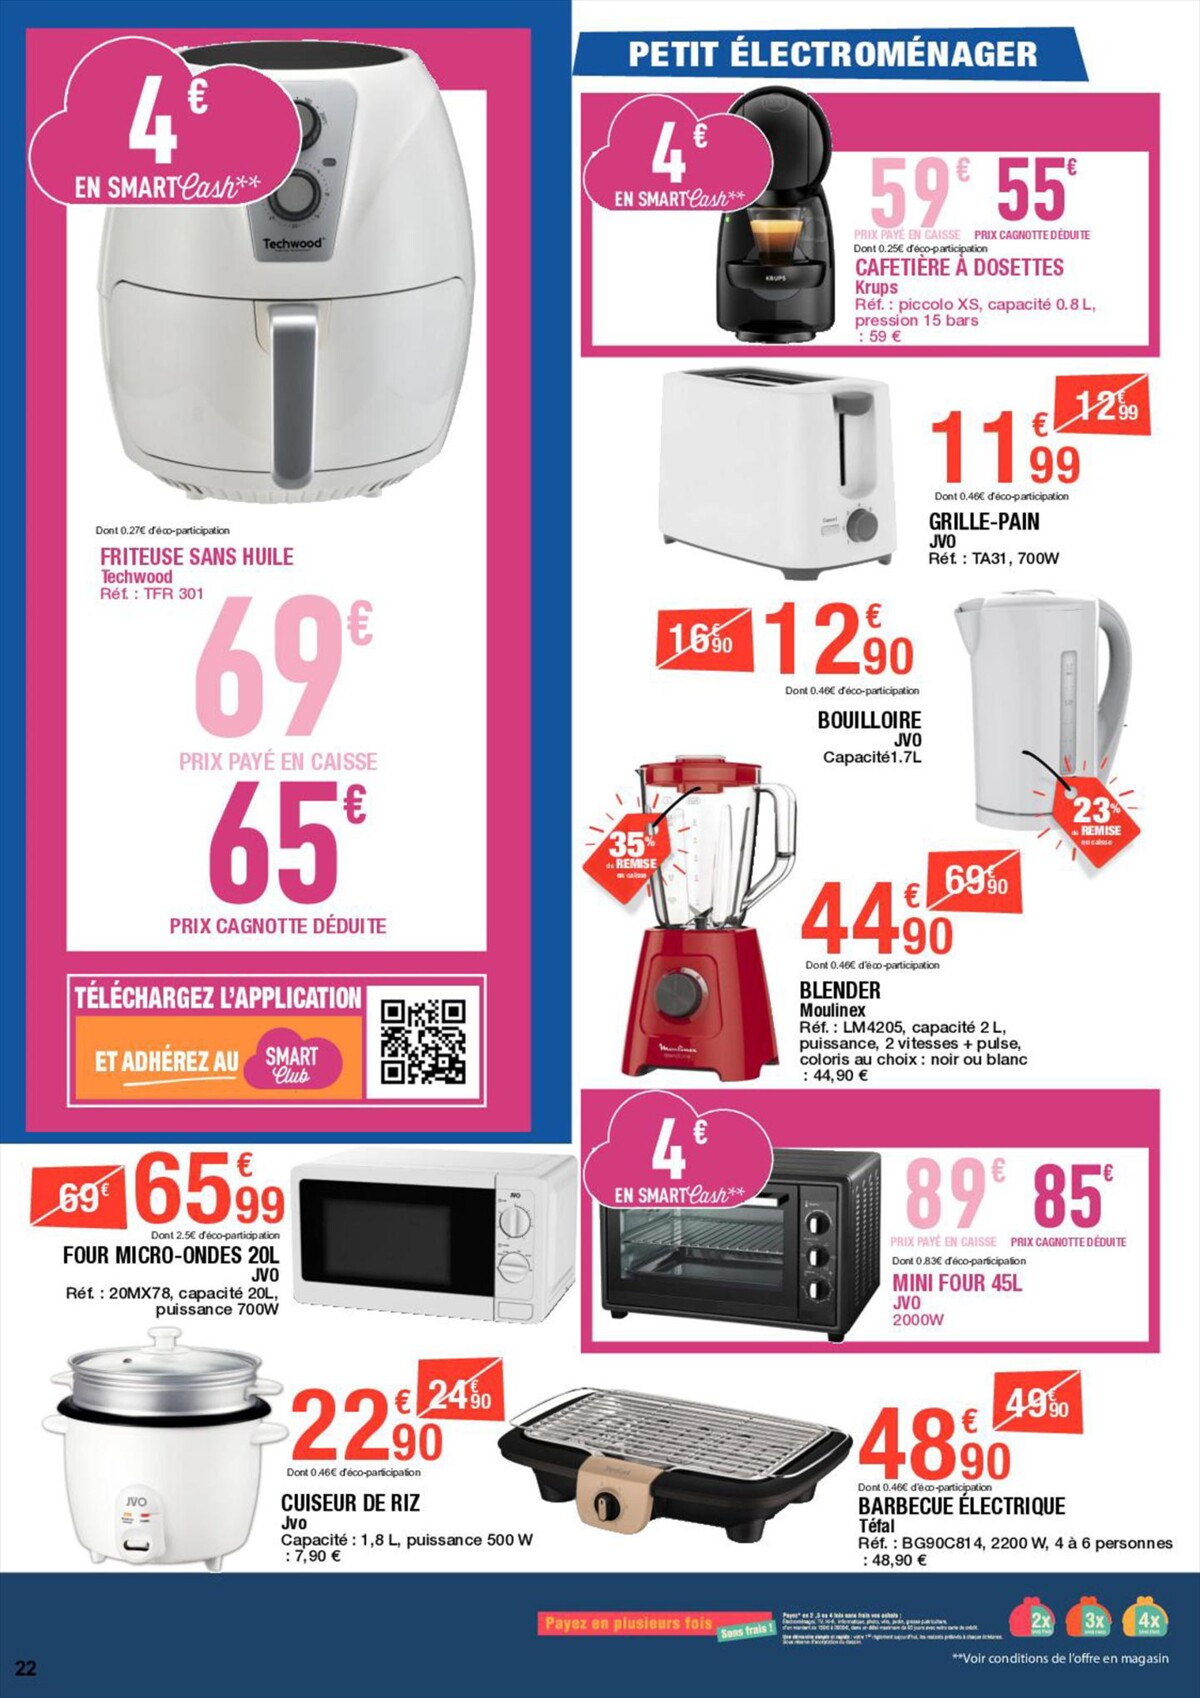 Catalogue Carrefour Special MDD, page 00022